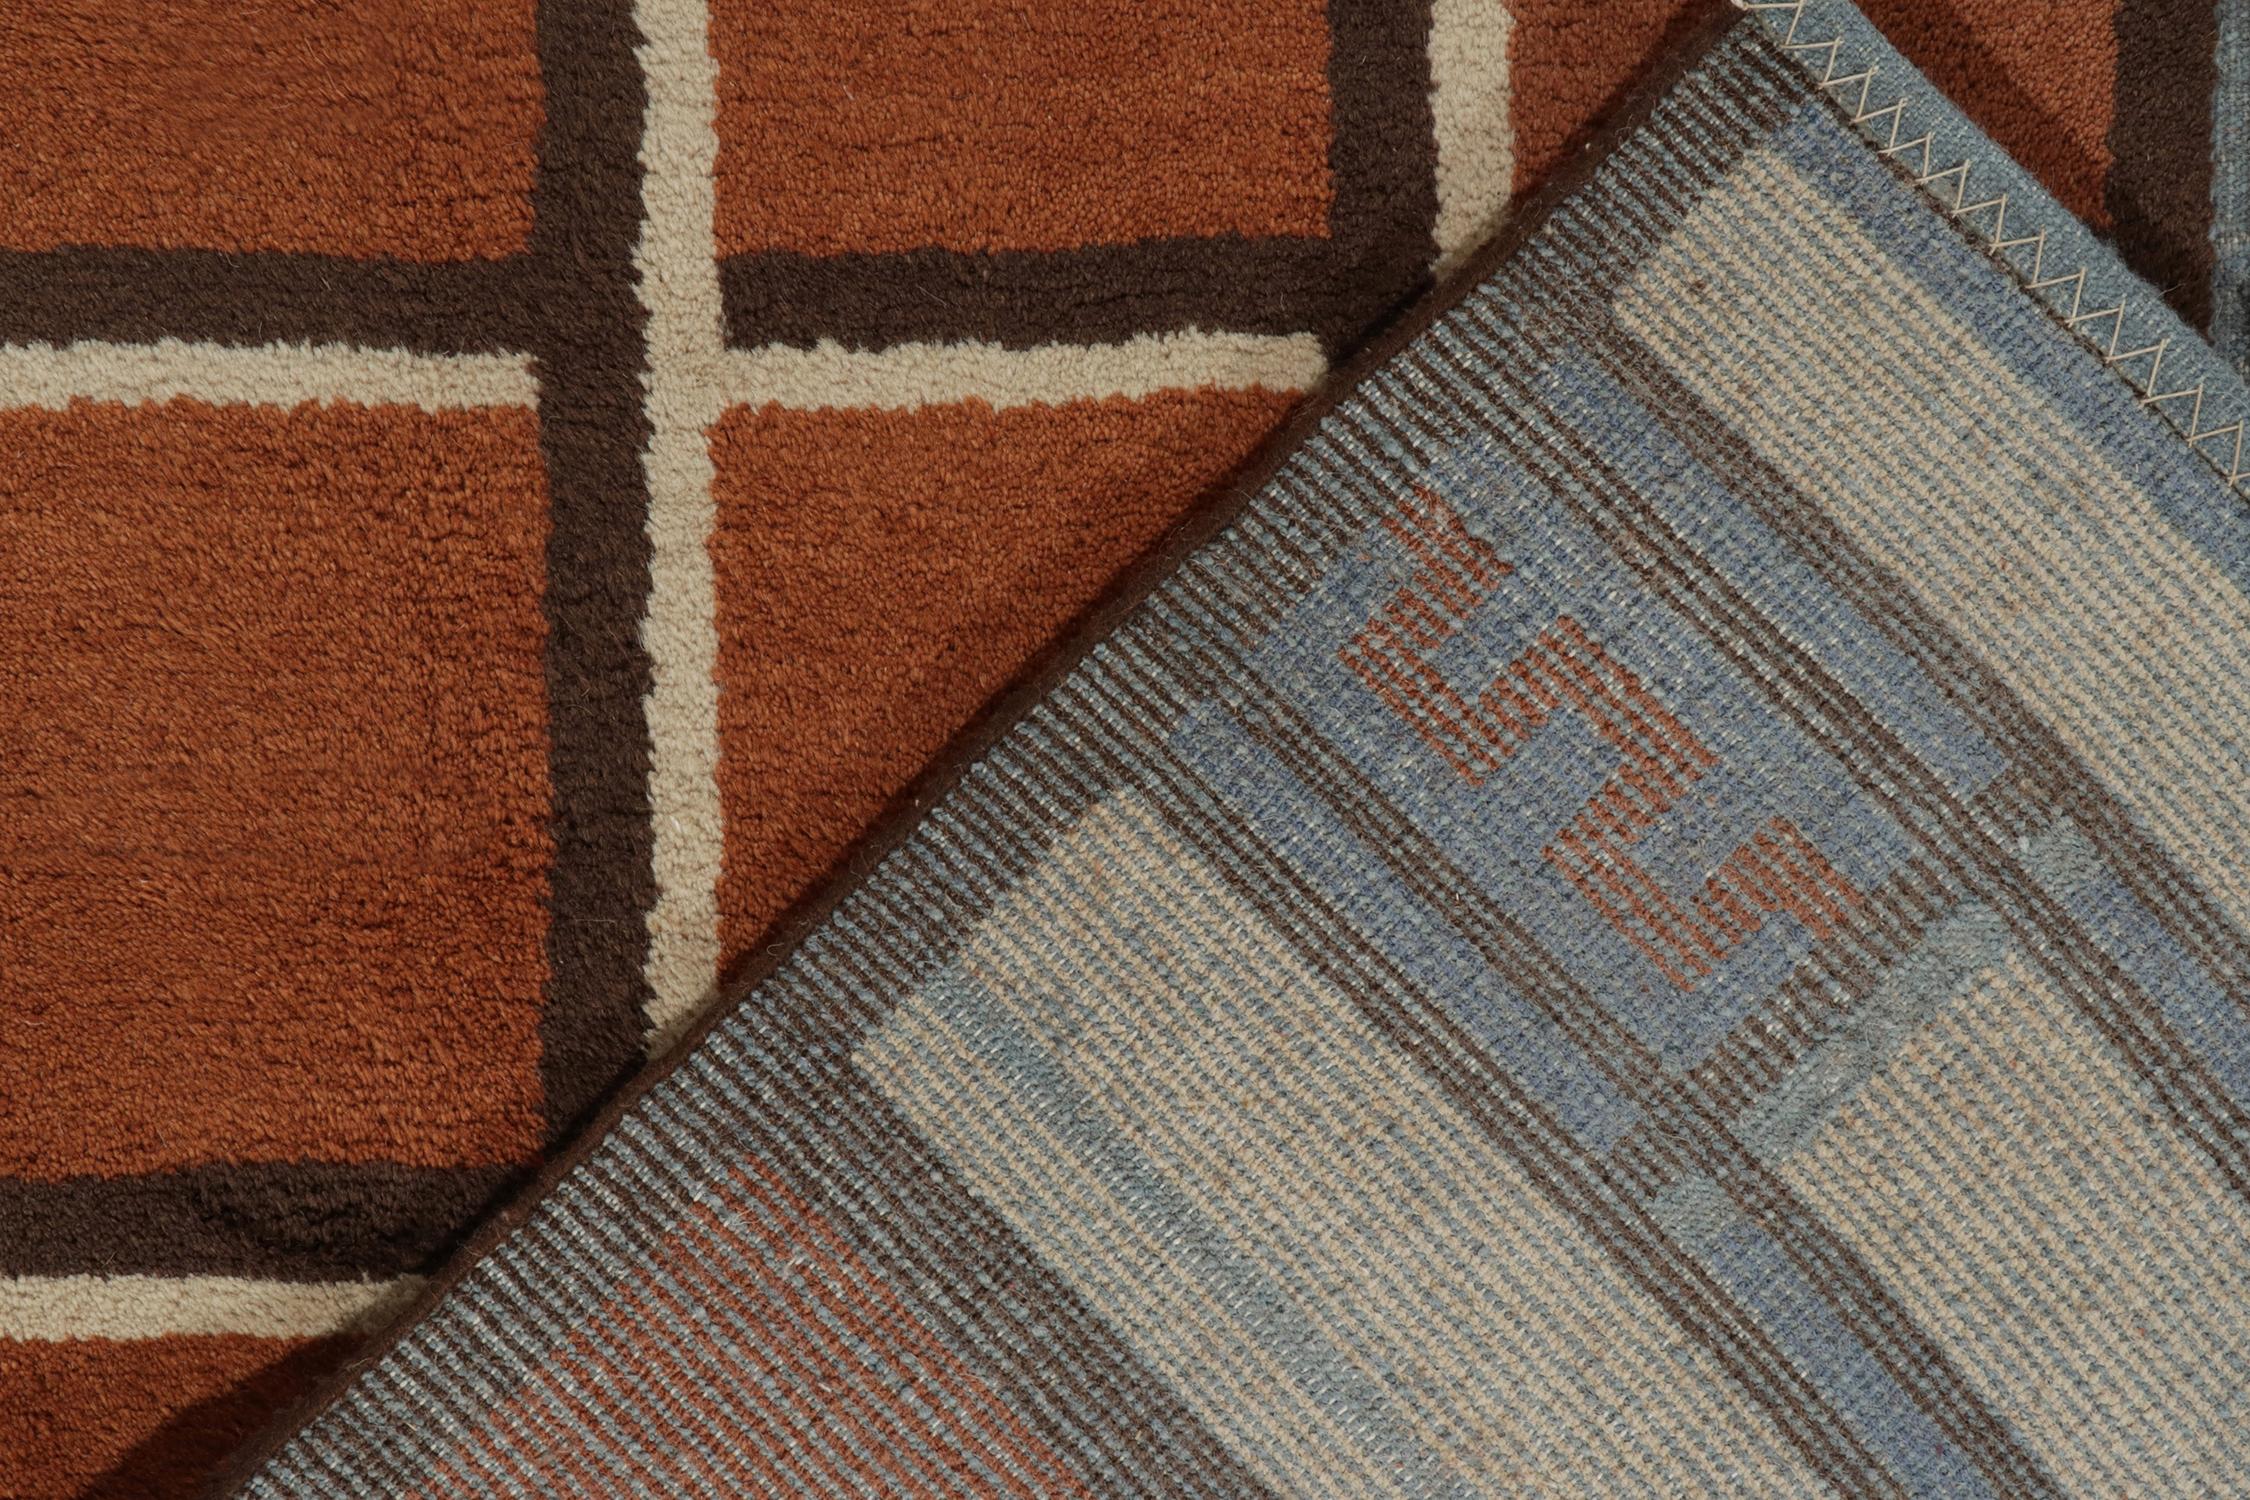 Contemporary Rug & Kilim’s Swedish Deco Style Rug in Rust-Orange, Beige-Brown & Blue Patterns For Sale